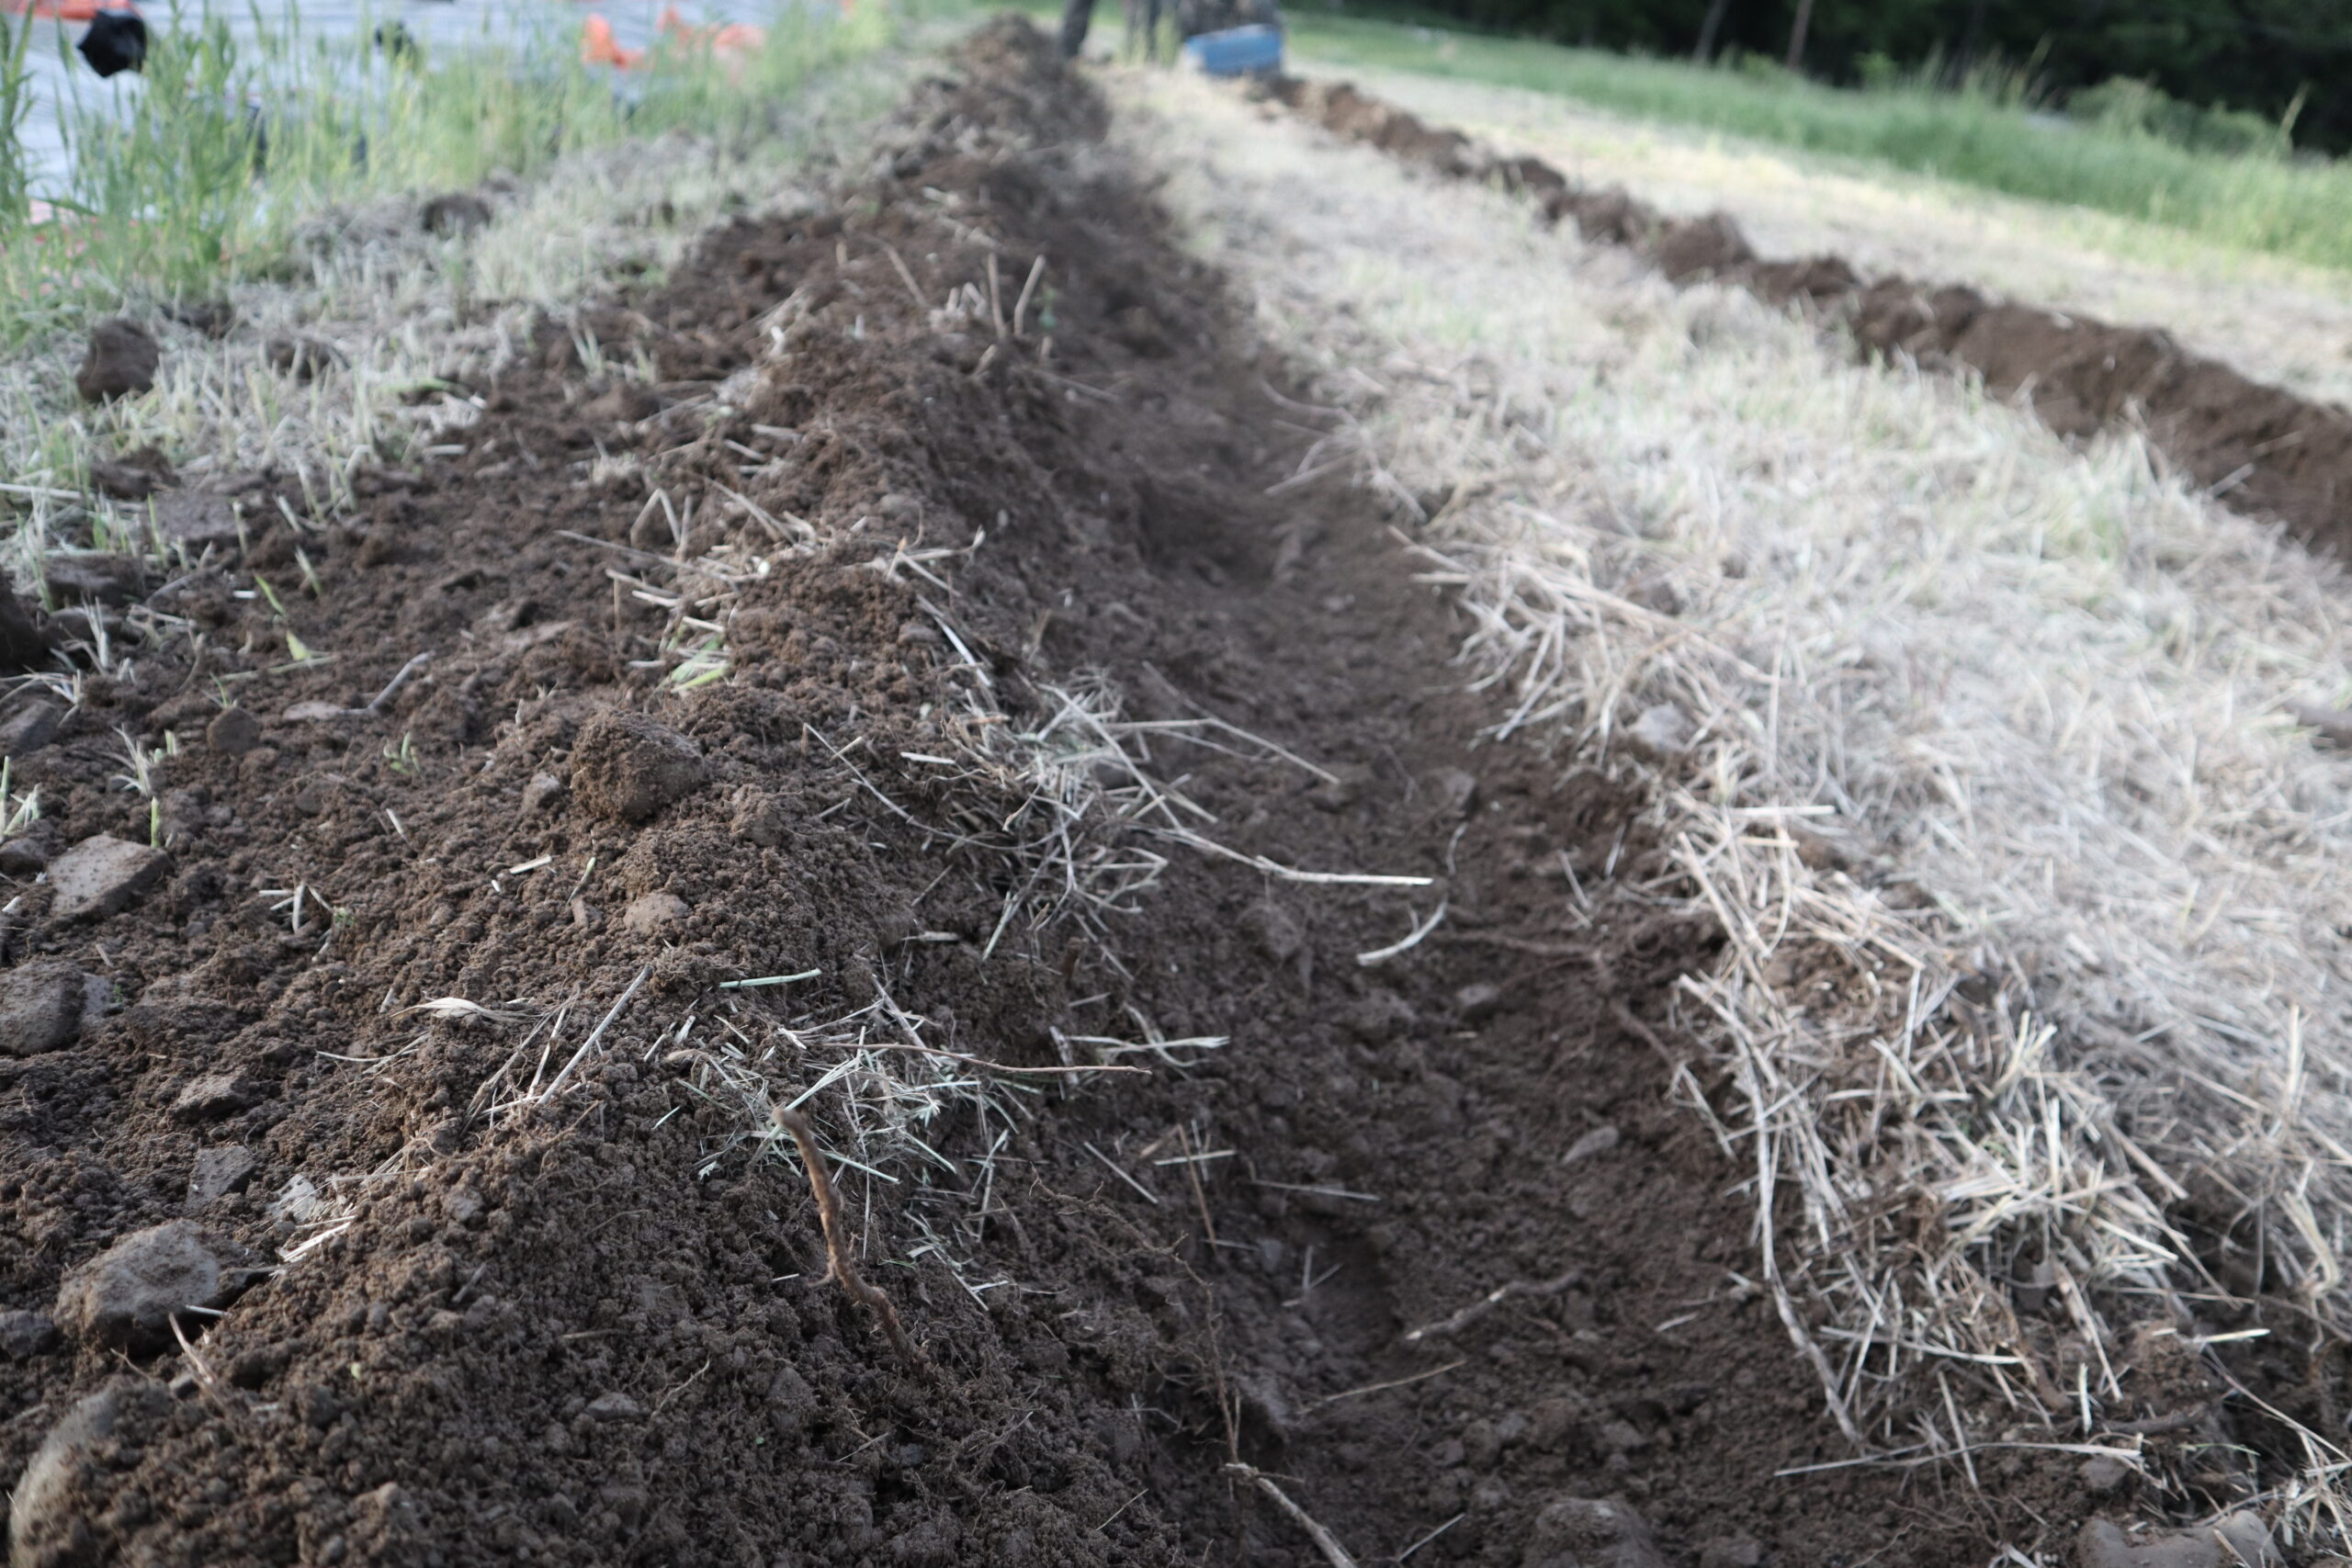 Strip tillage loosens soil to prep the planting zone while maintaining cover crop residue in between-row areas.